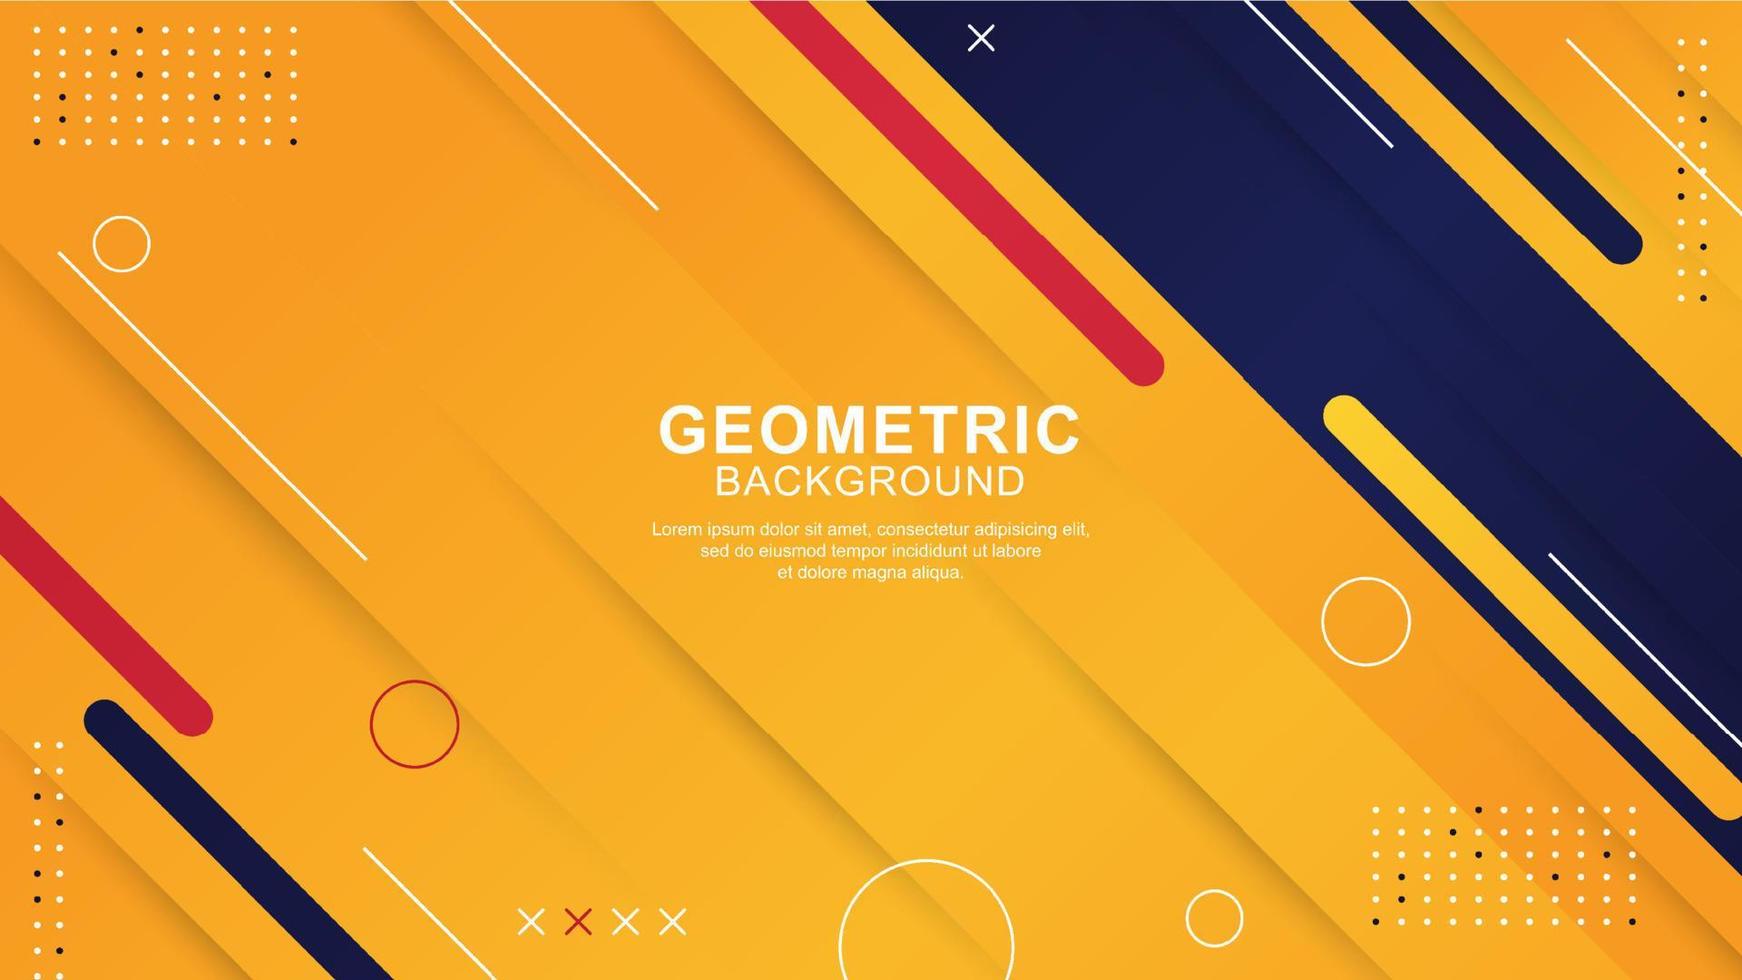 Geometric shape background with modern design vector